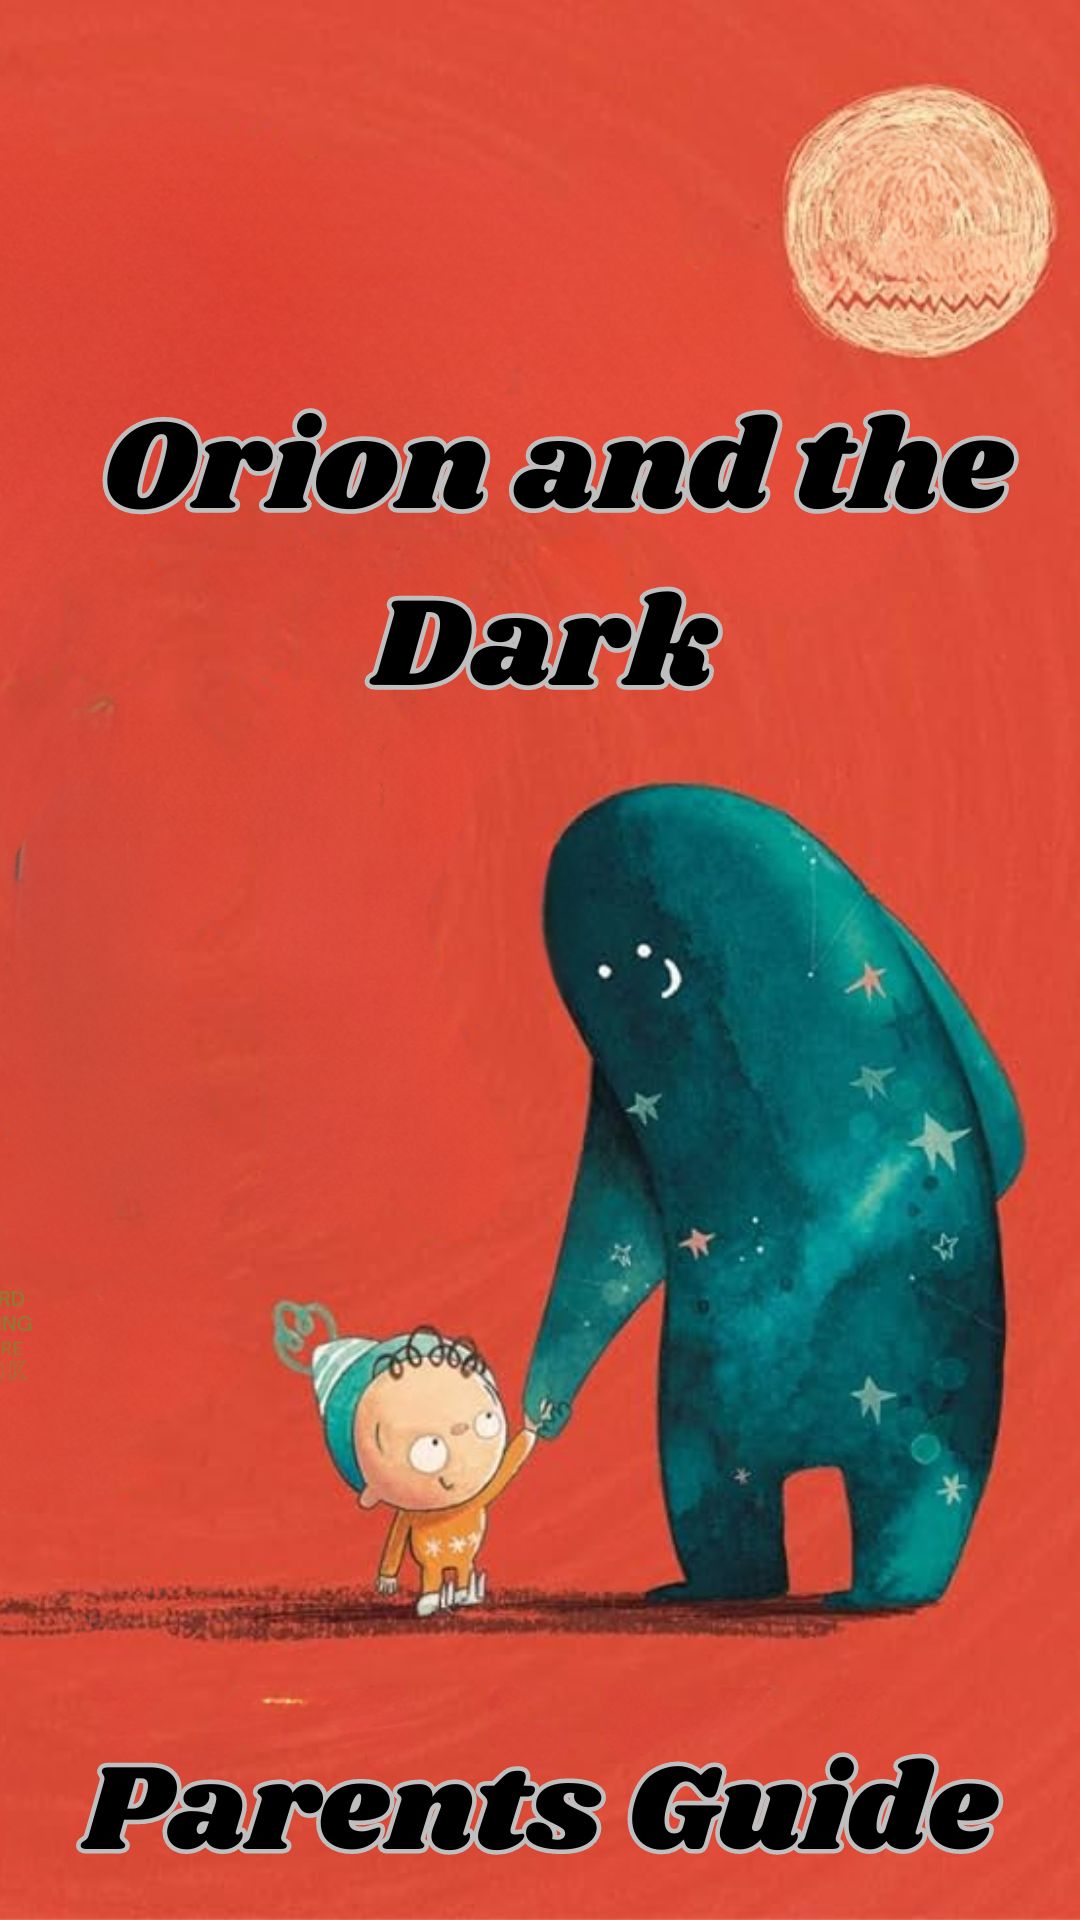 Orion and the Dark: Cast, Trailer and Plot of New Charlie Kaufman